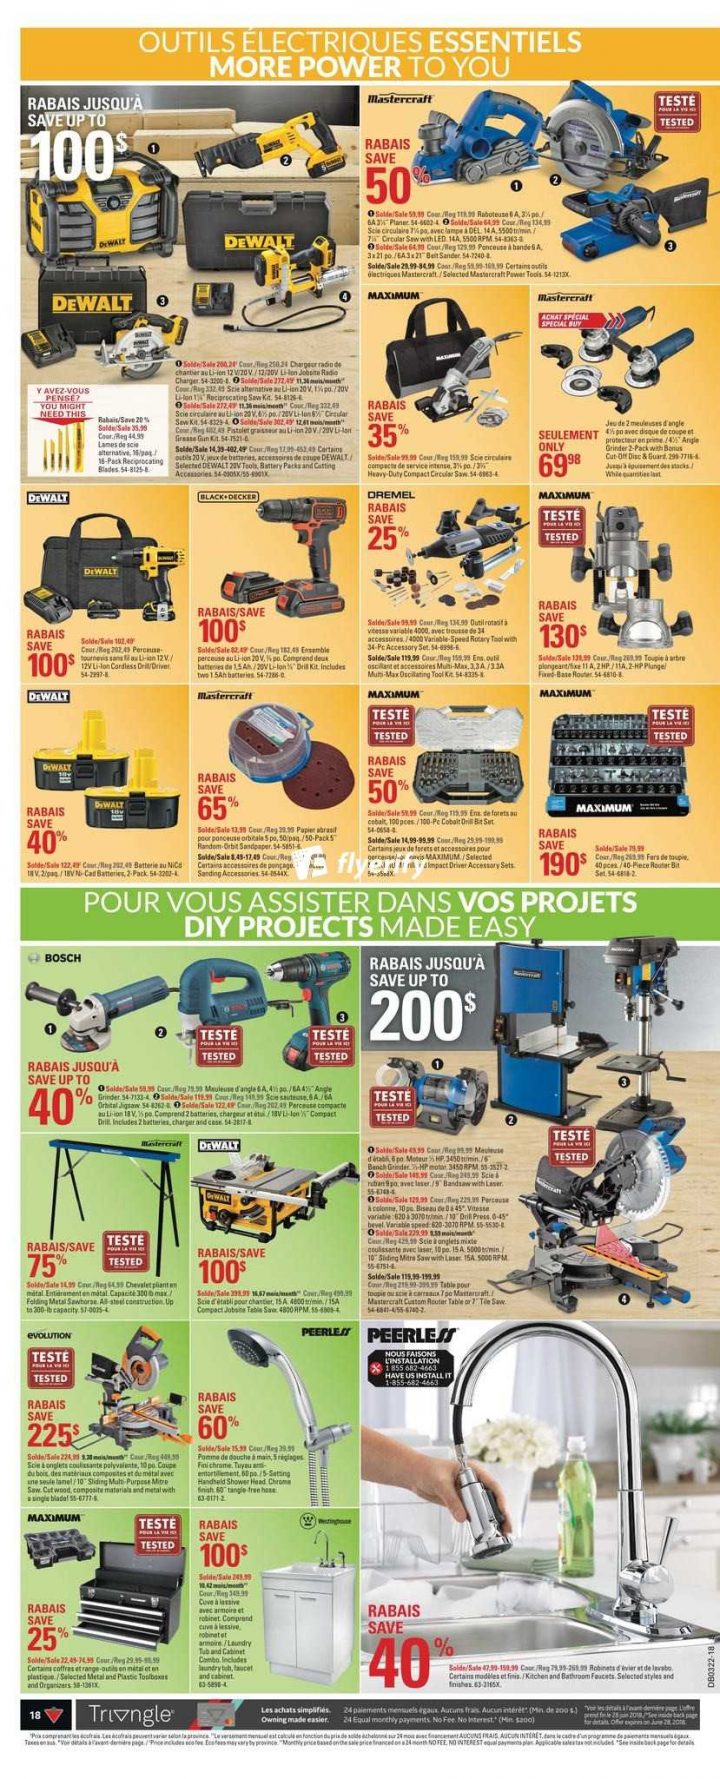 Canadian Tire (Qc) Flyer May 24 To 30 Canada concernant Robinet Lavabo Canadian Tire